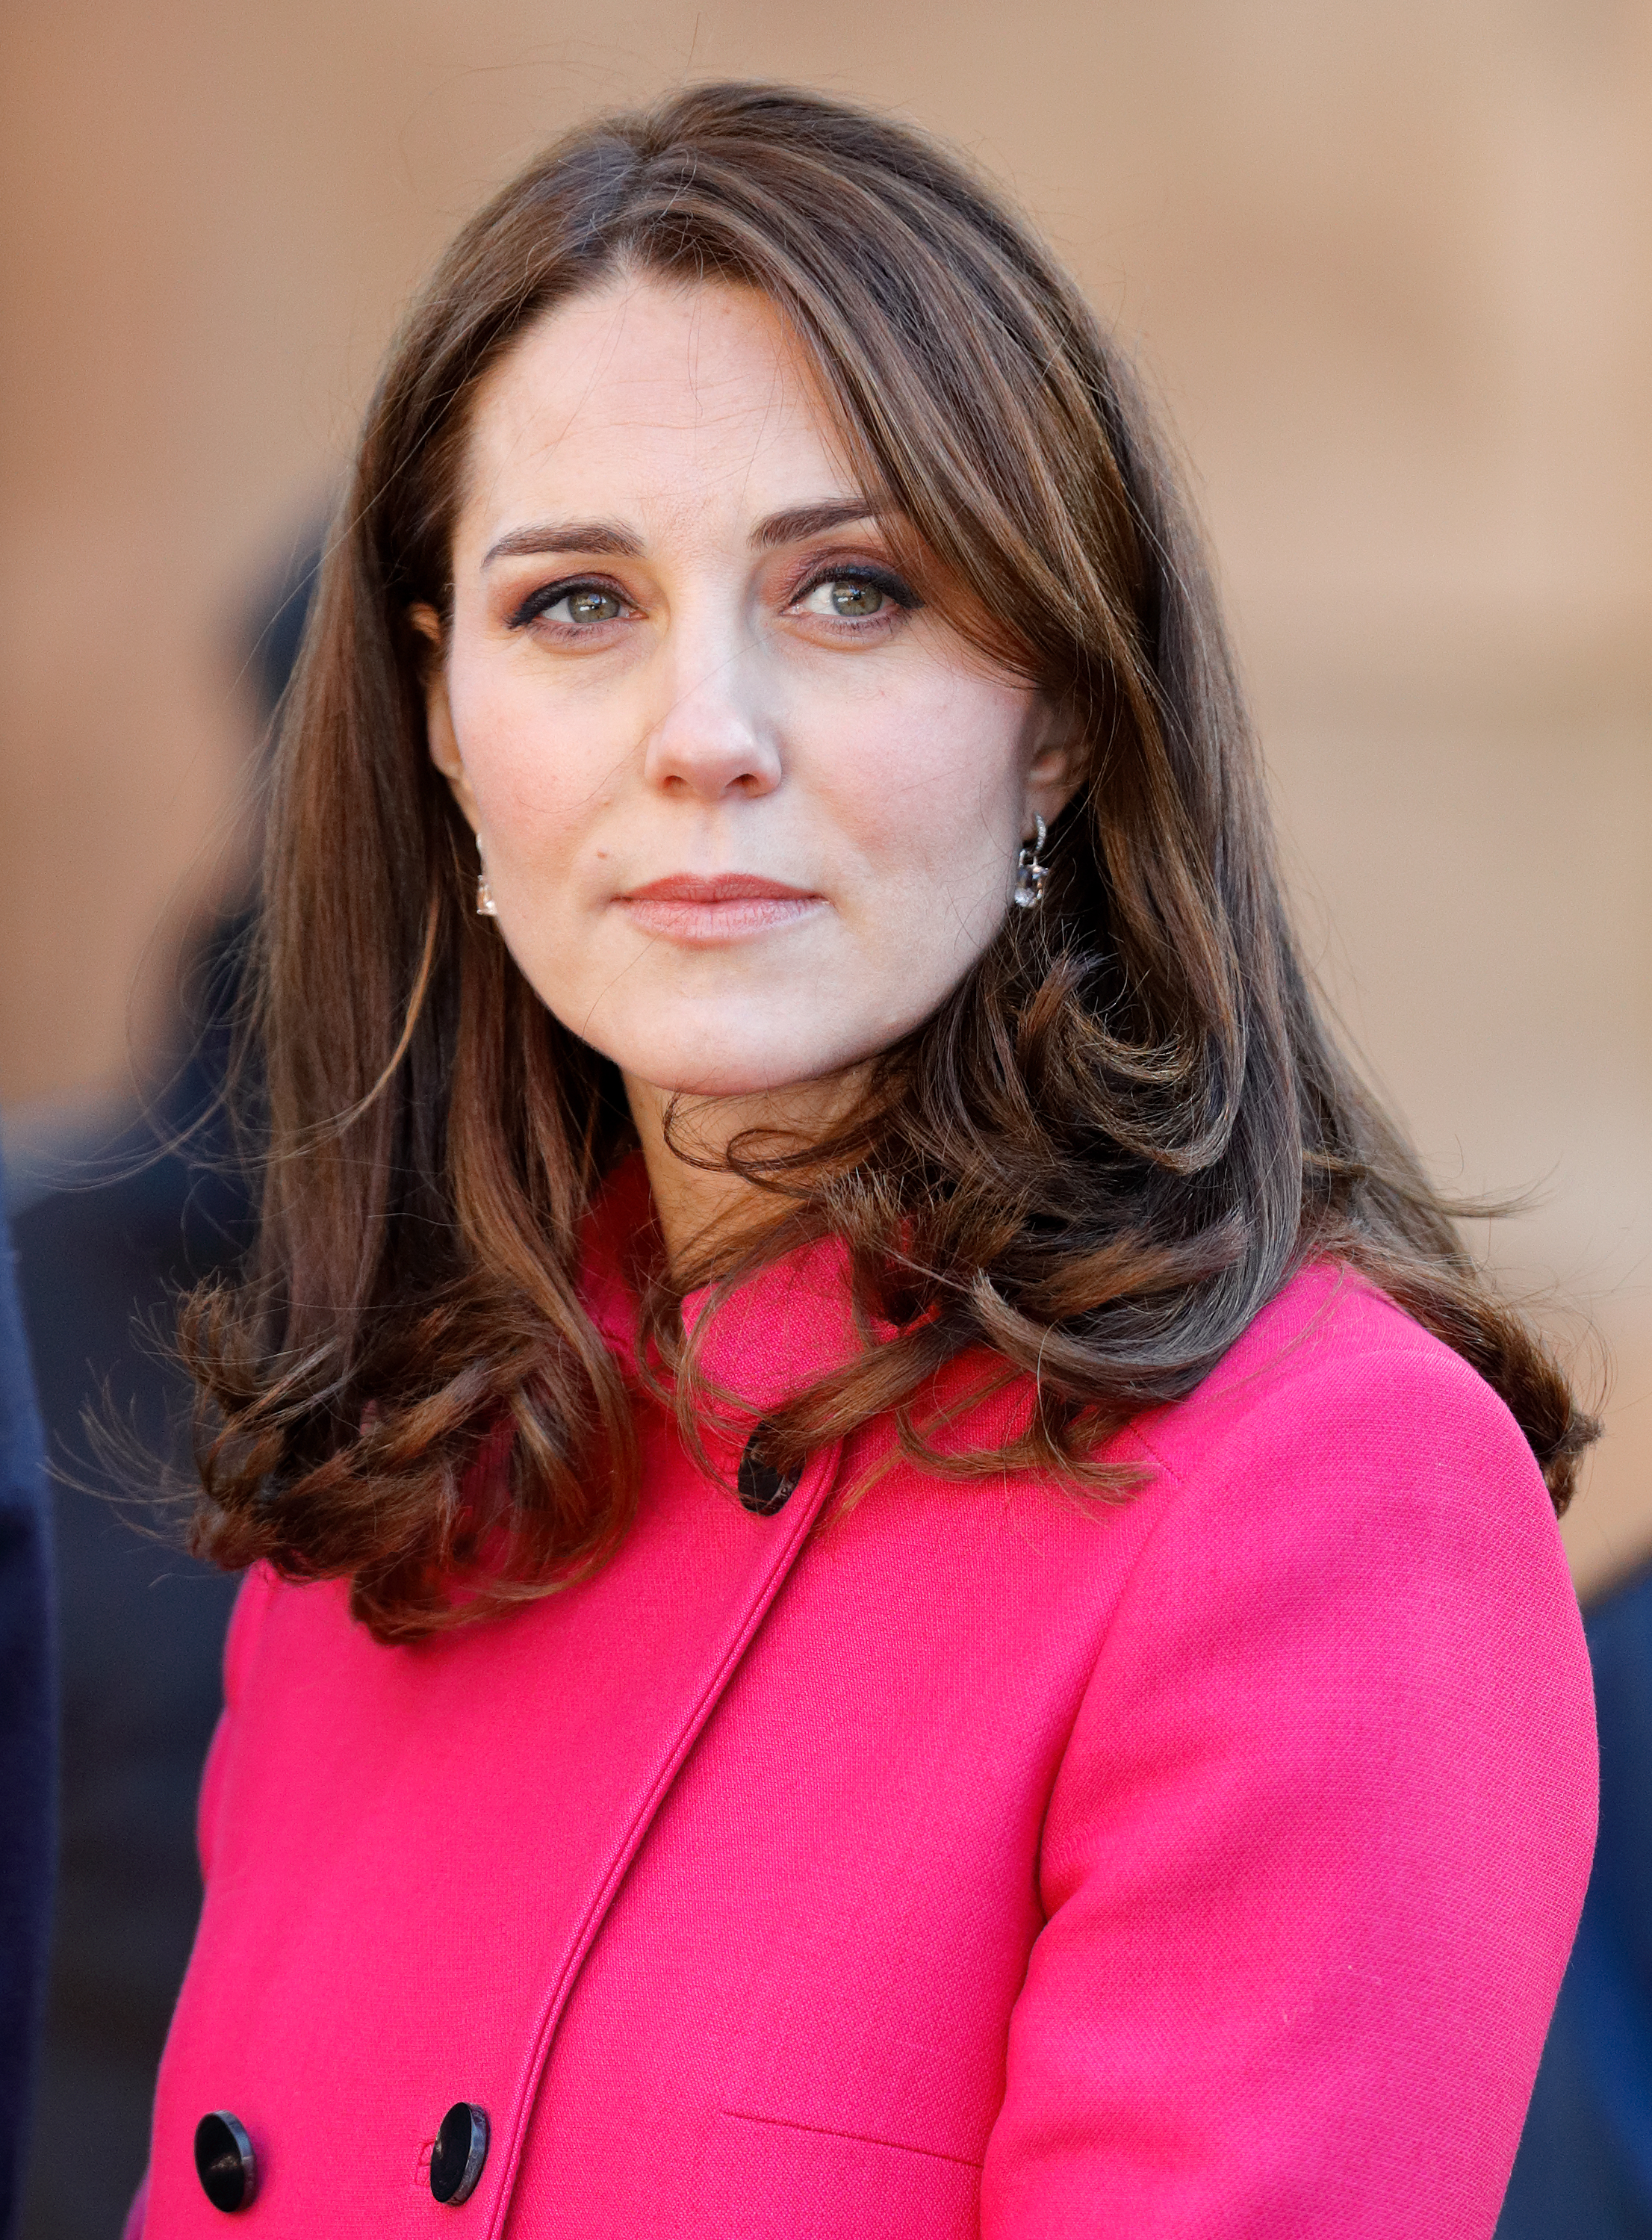 Princess of Wales at the Coventry Cathedral, in Coventry in 2018 | Source: Getty Images